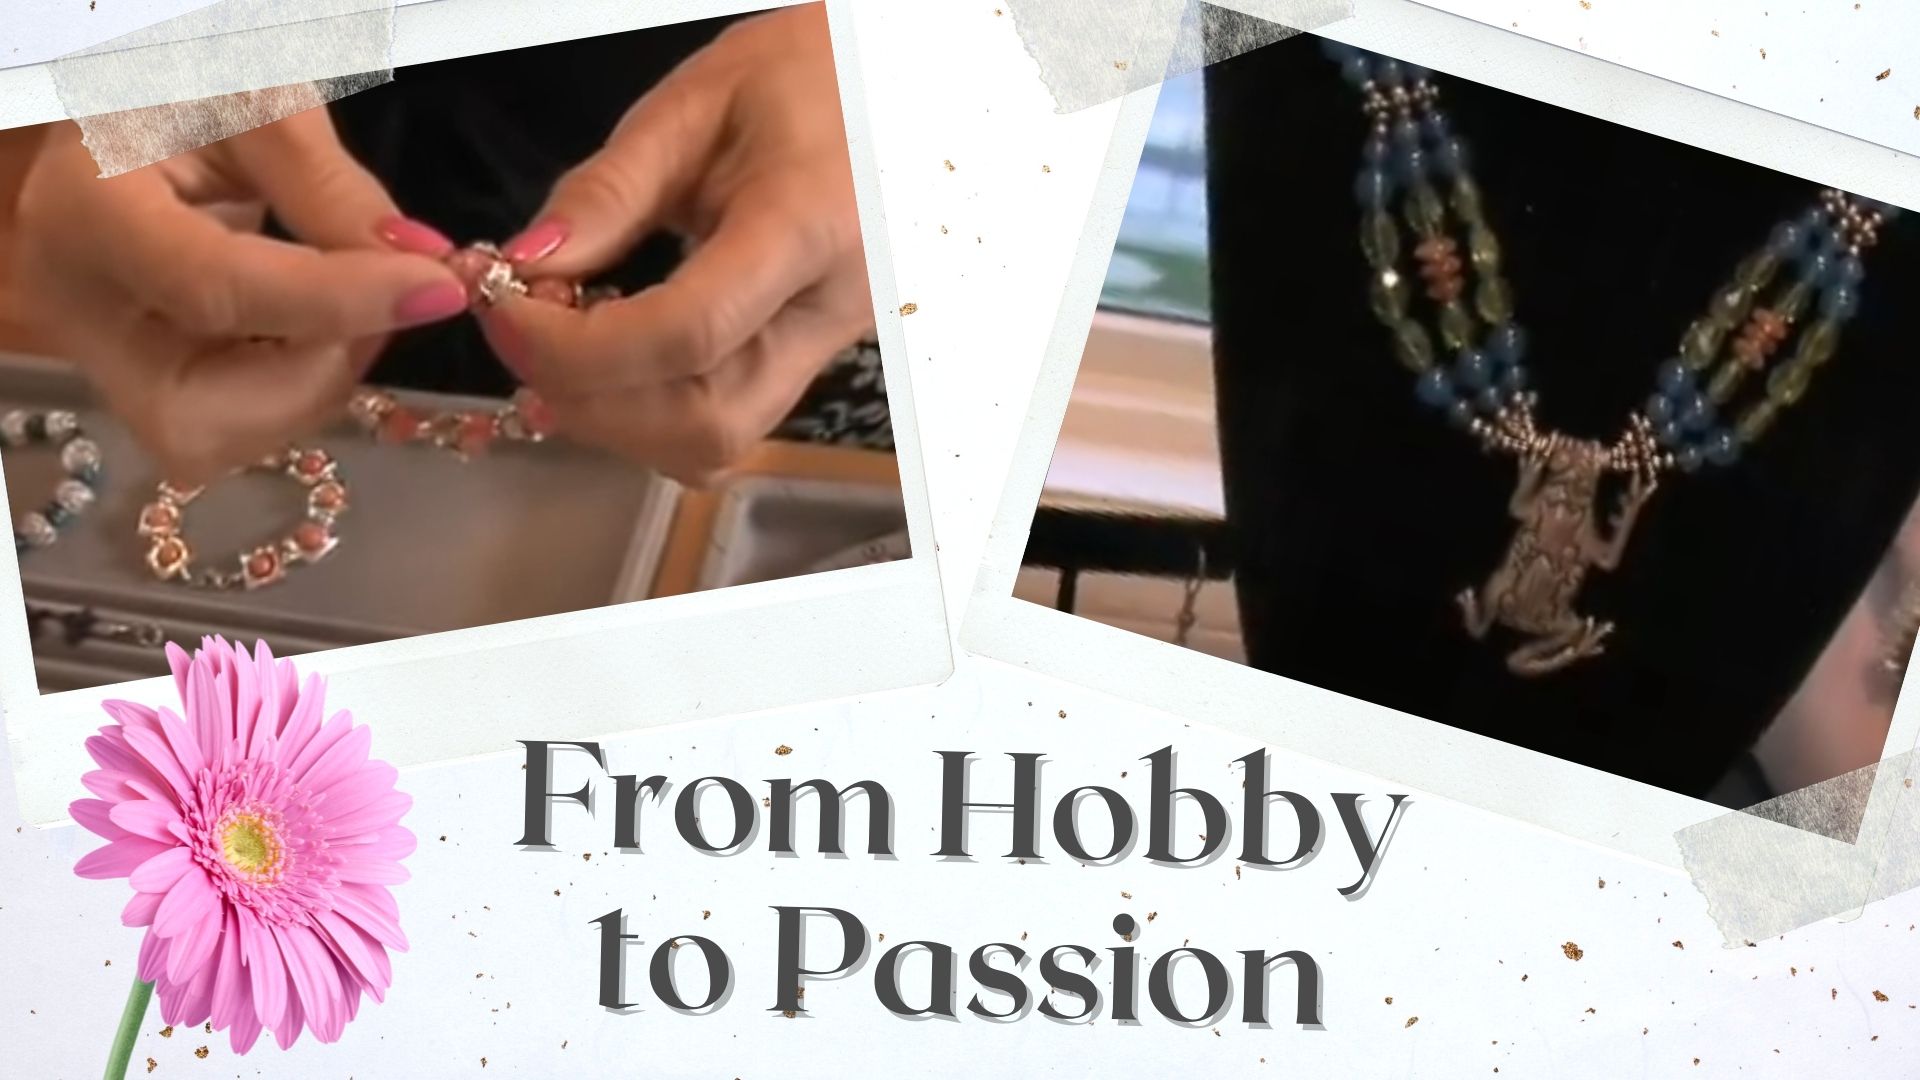 YouTube: From Hobby to Passion